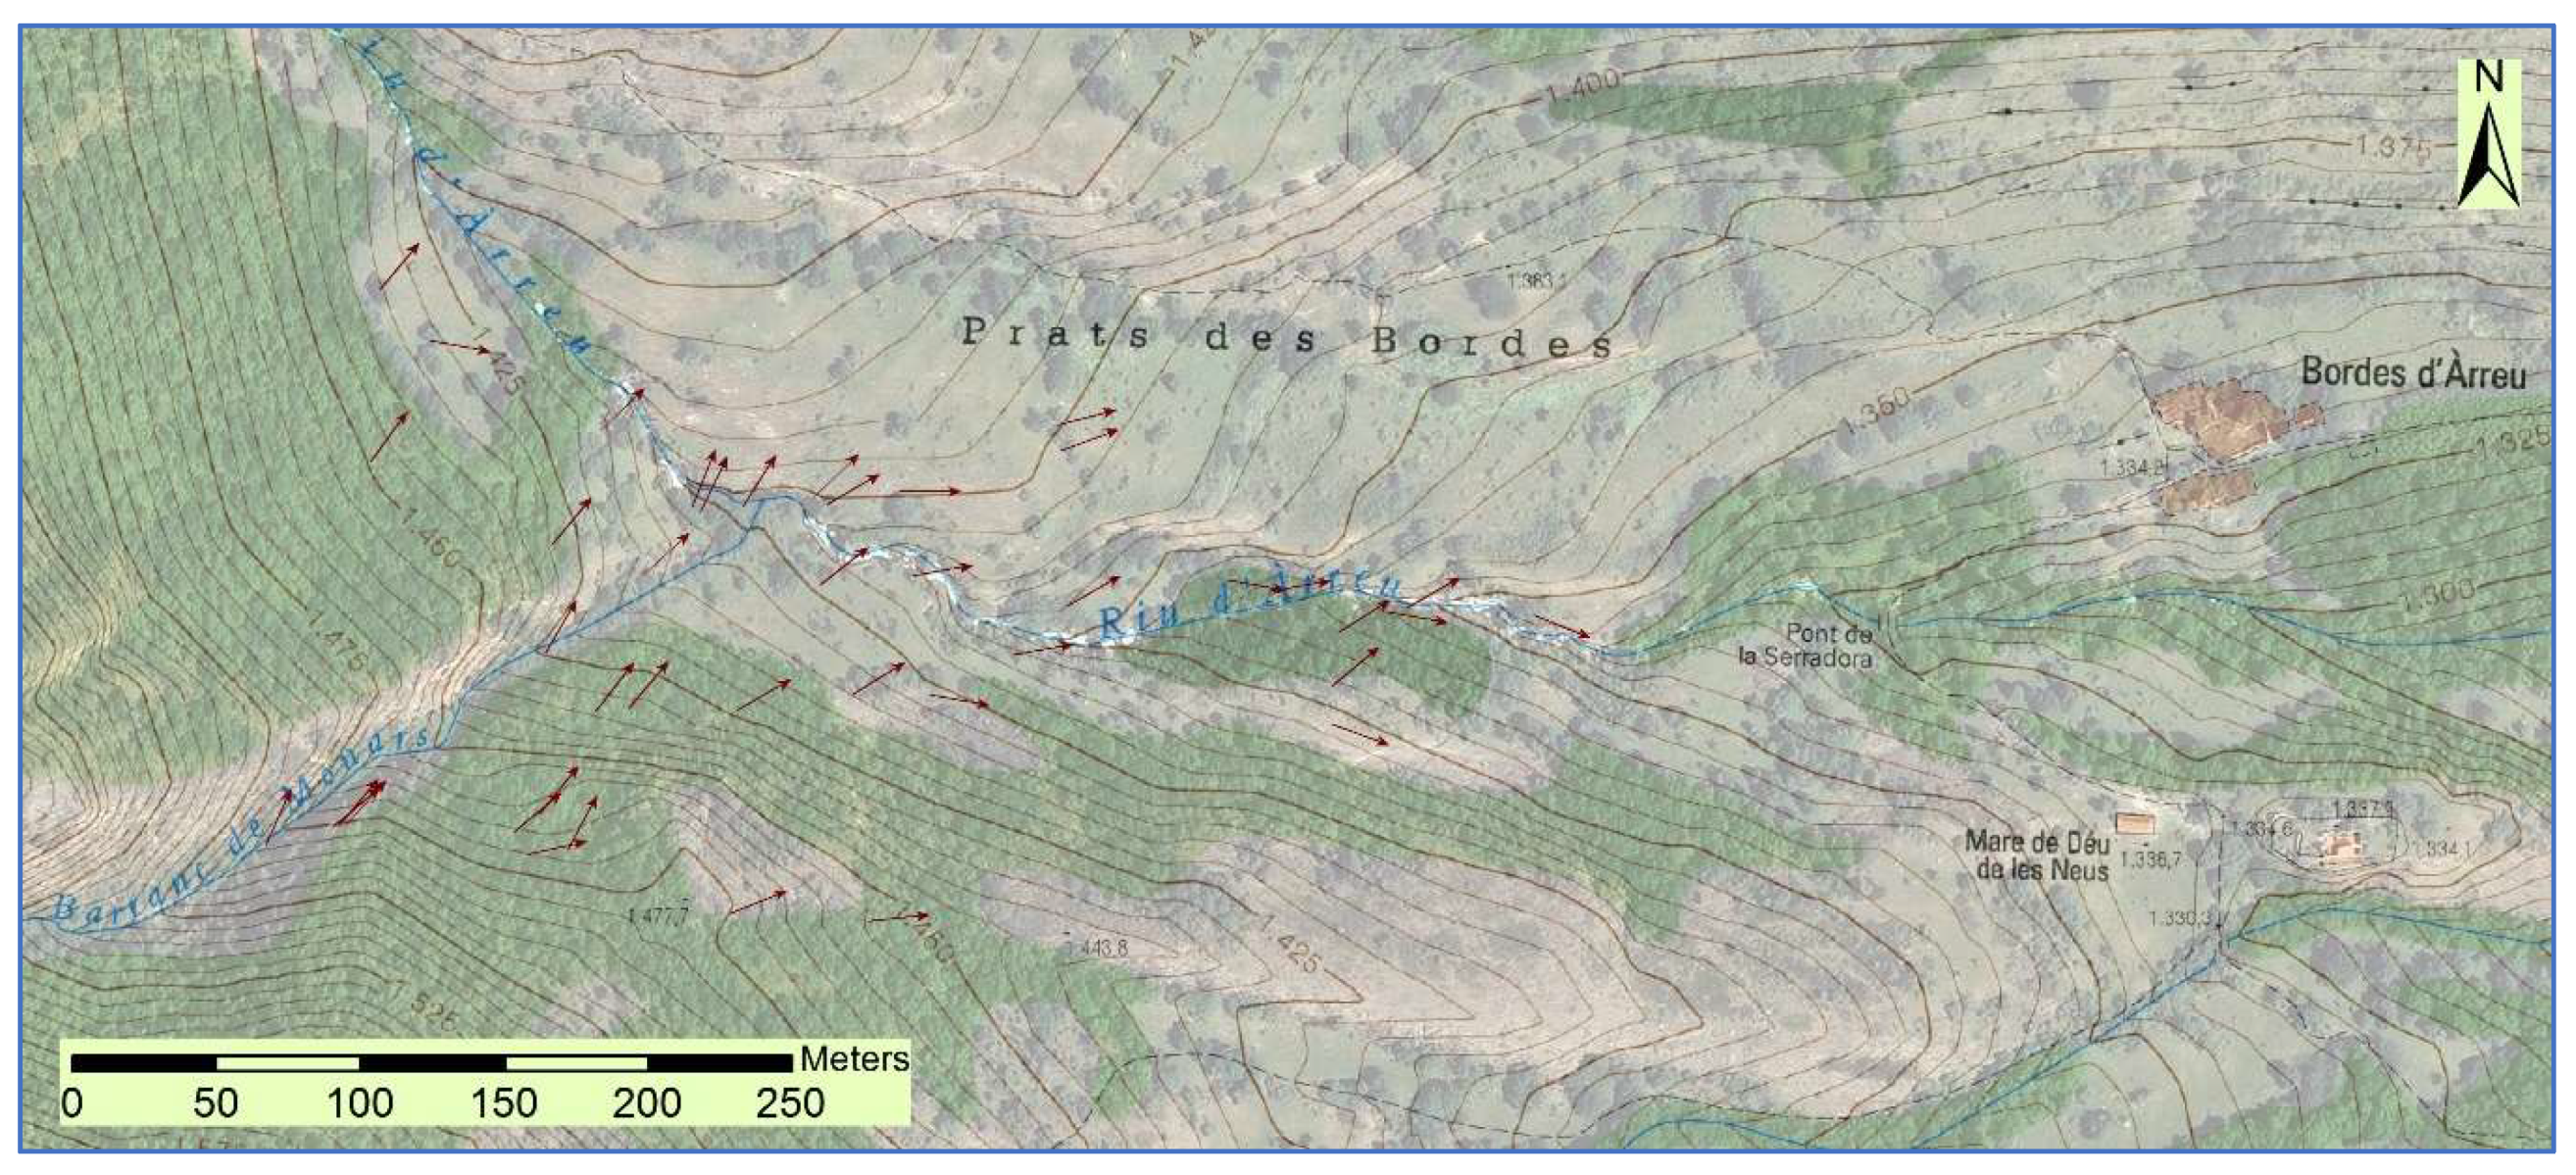 Geosciences | Free Full-Text | The Historic Avalanche that Destroyed the  Village of Àrreu in 1803, Catalan Pyrenees | HTML